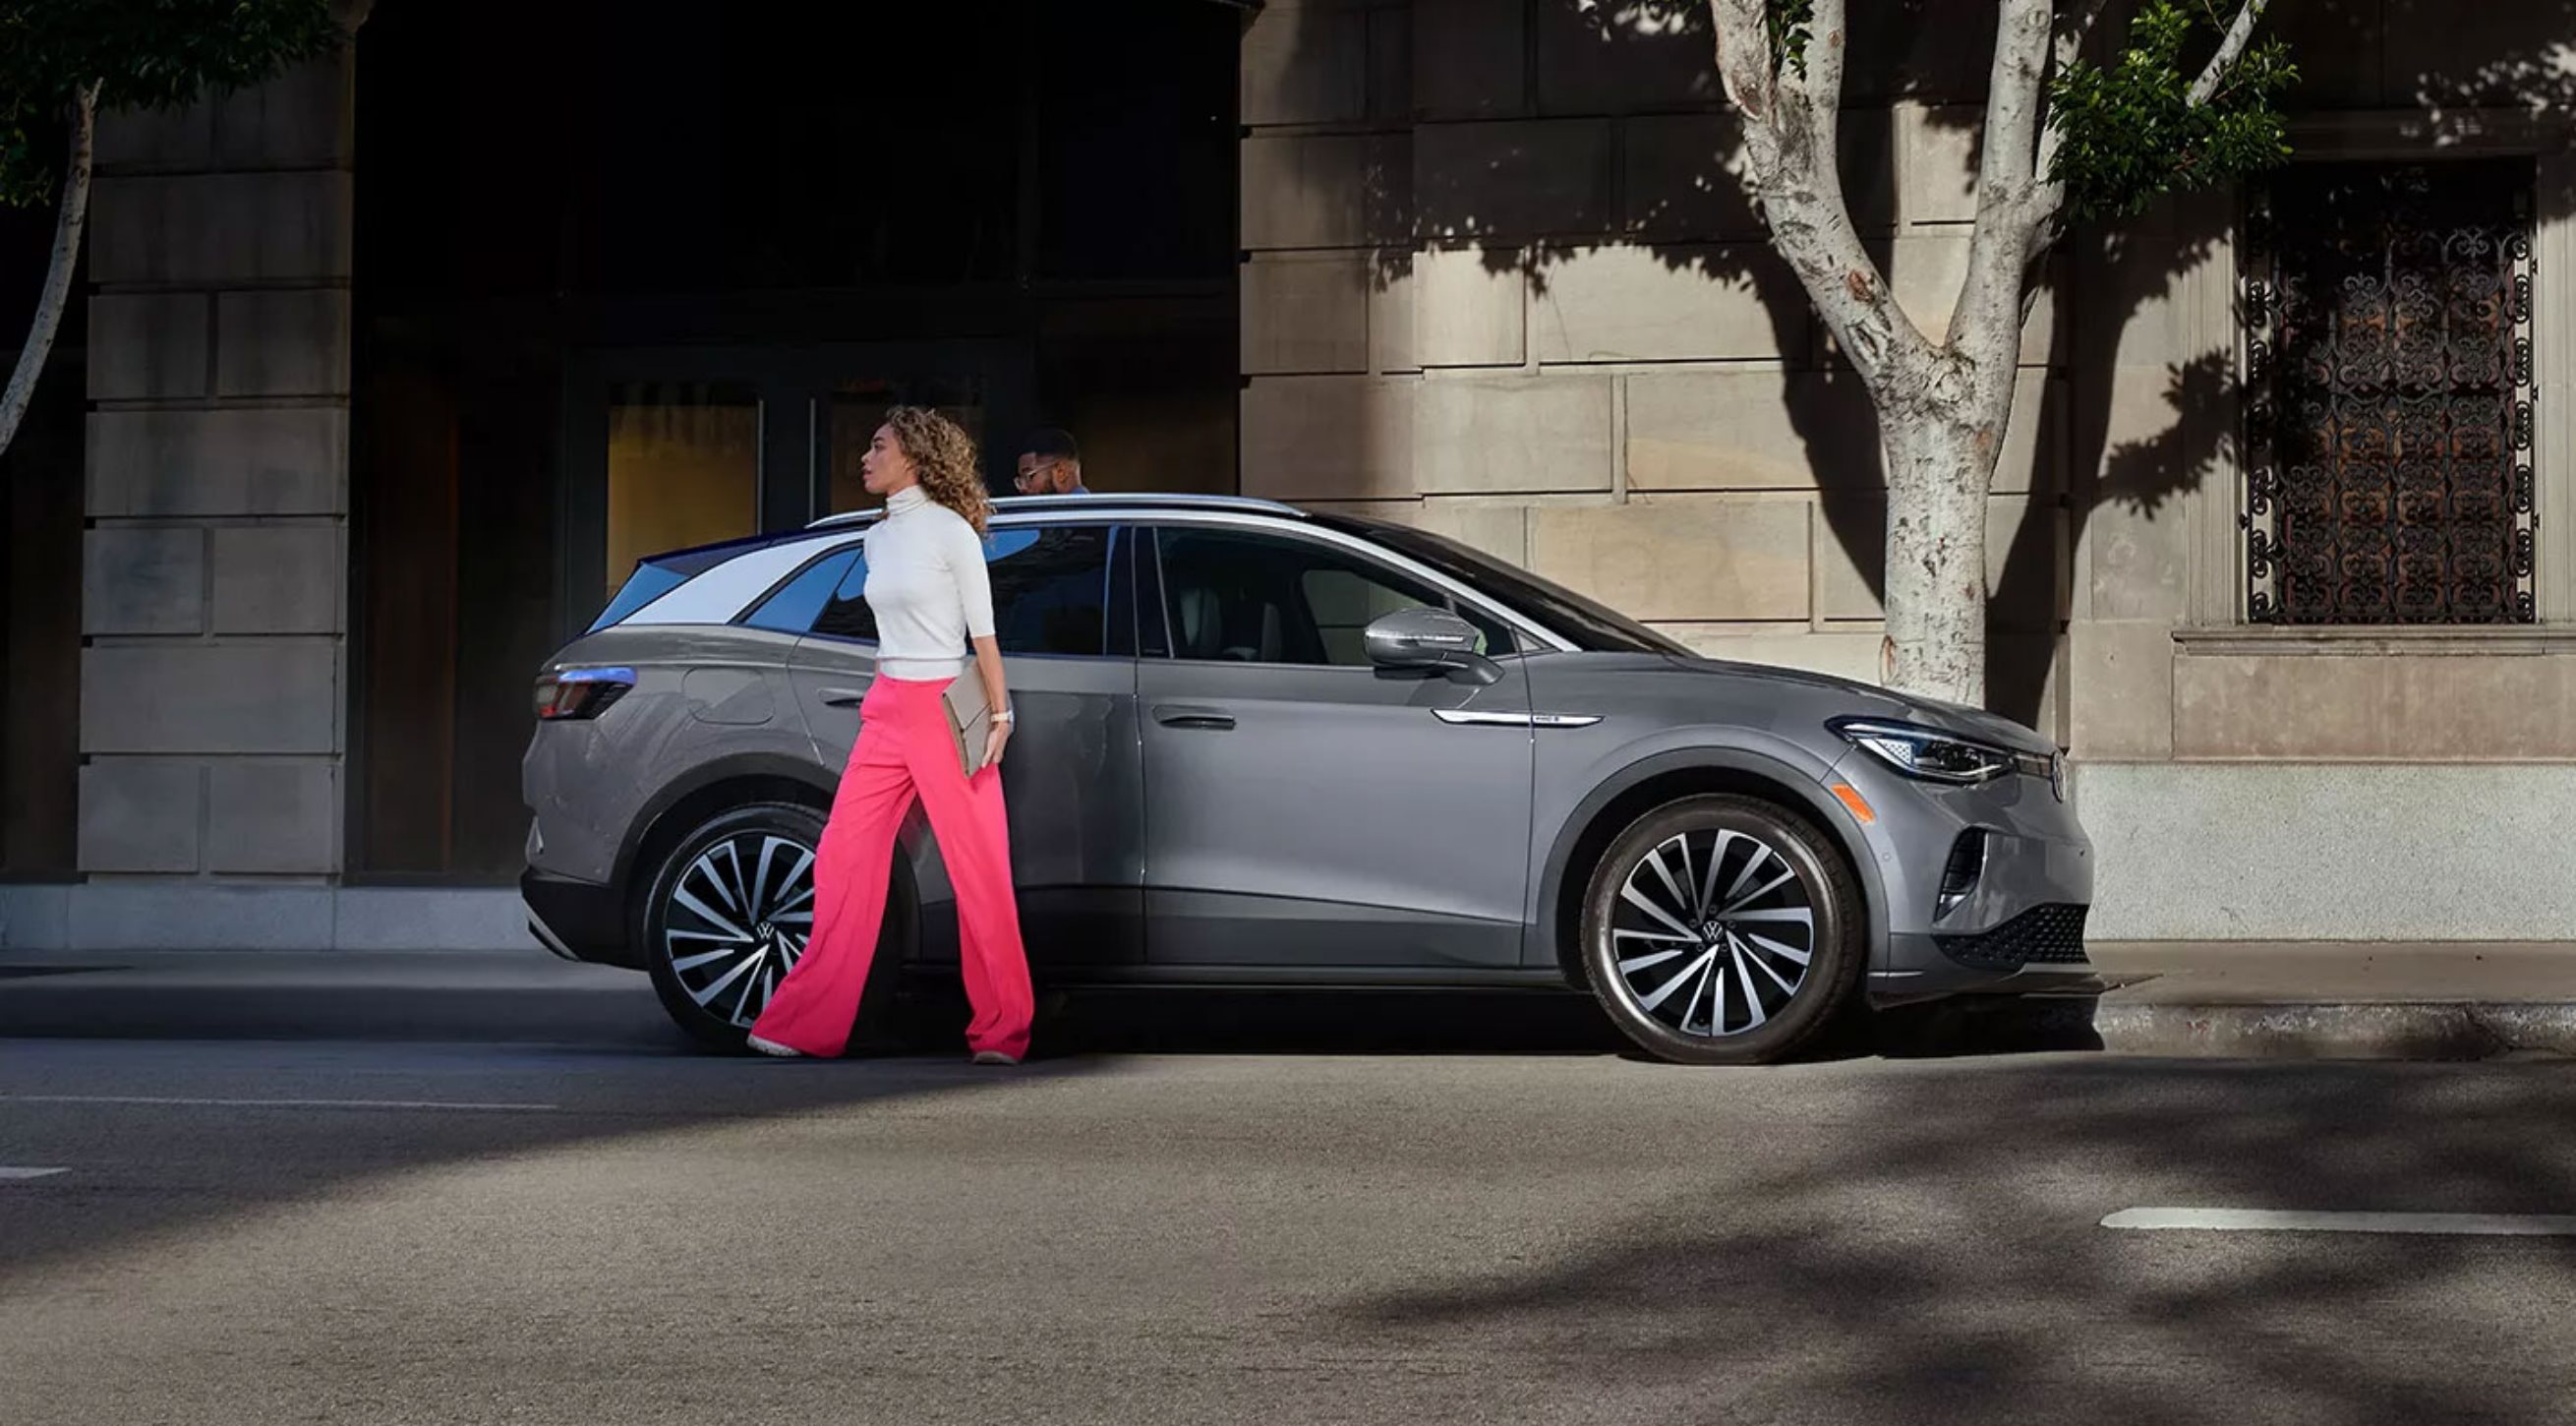 2023 Volkswagen ID.4 parked on city street with woman walking next to SUV.